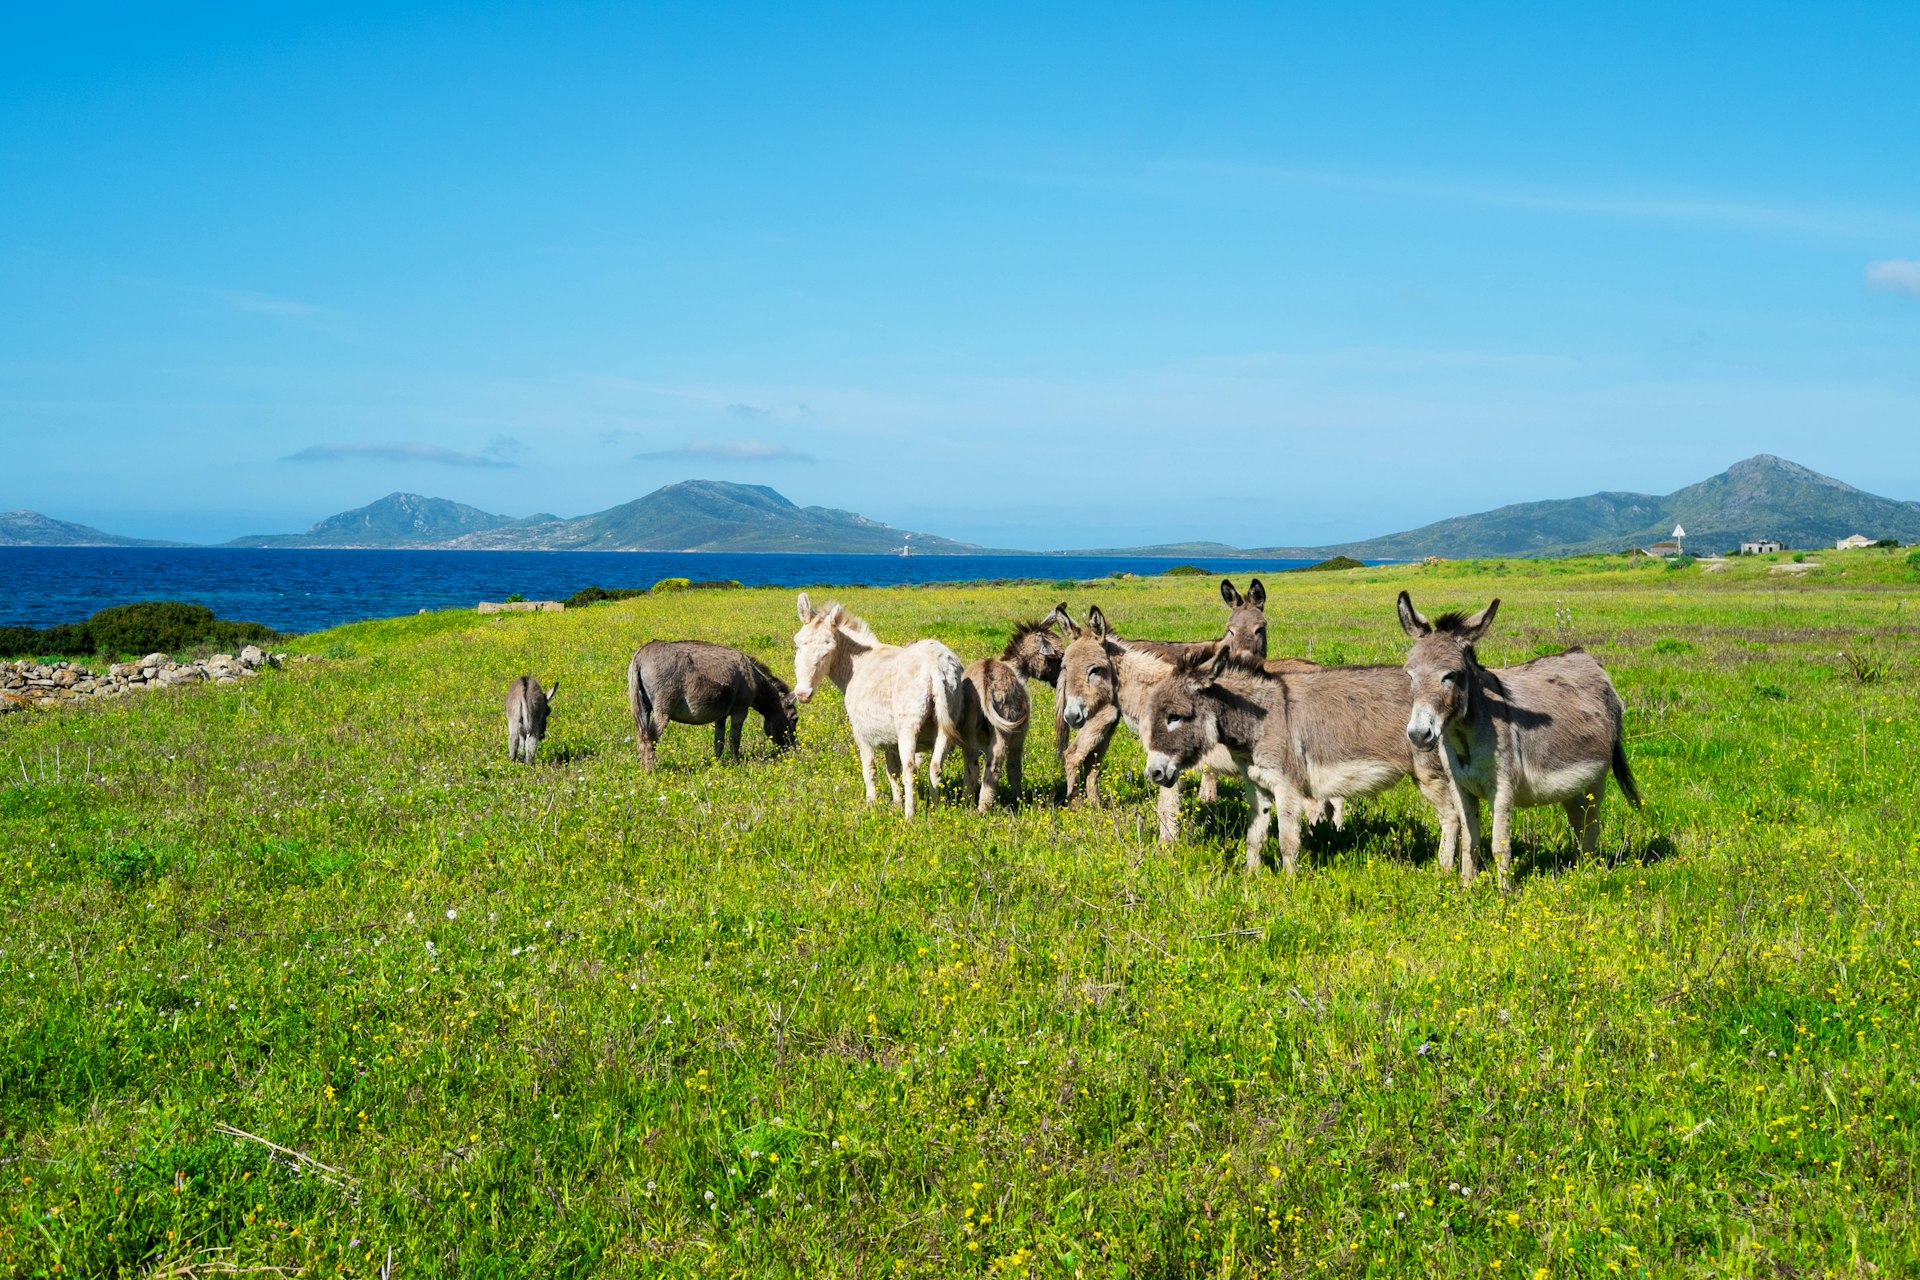 A small group of donkeys grazing on grassland near the sea